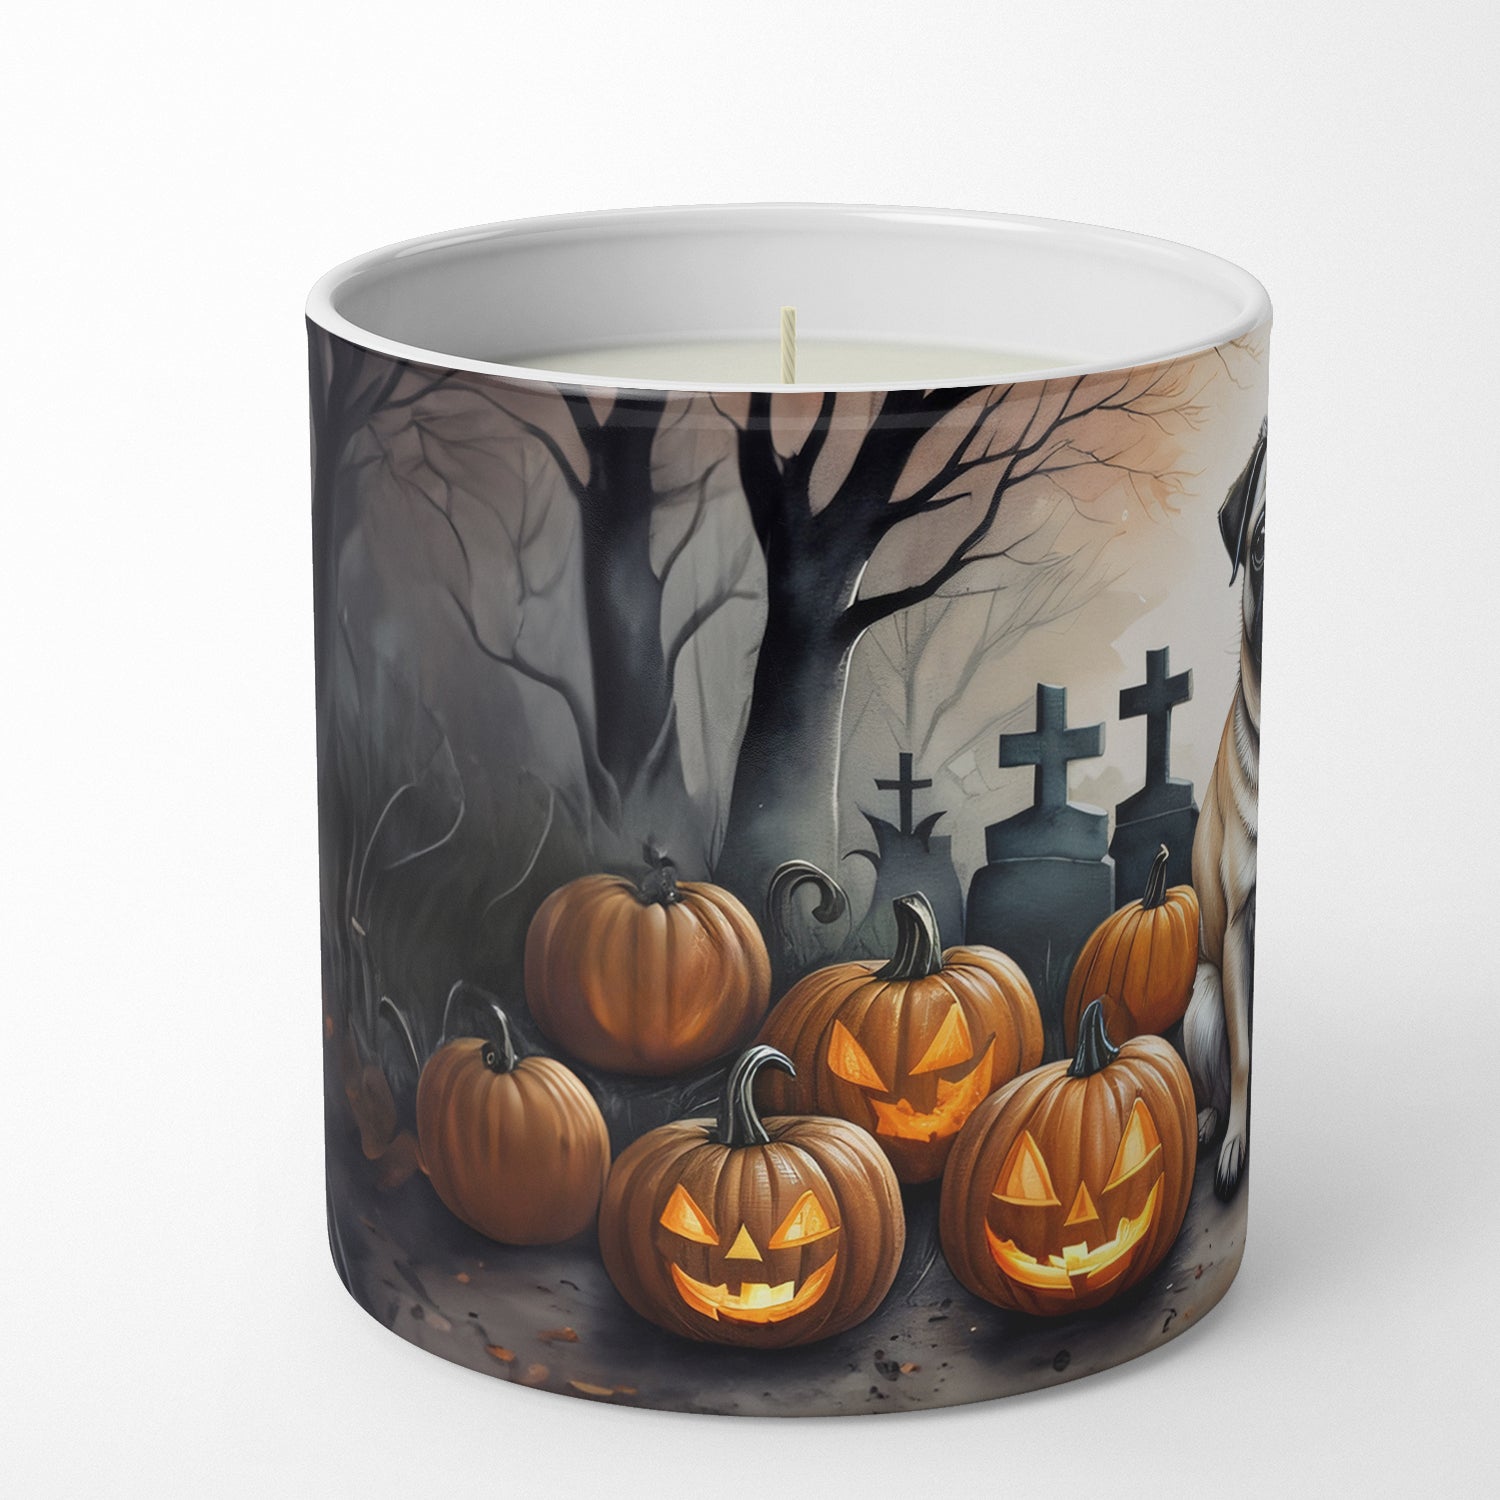 Fawn Pug Spooky Halloween Decorative Soy Candle